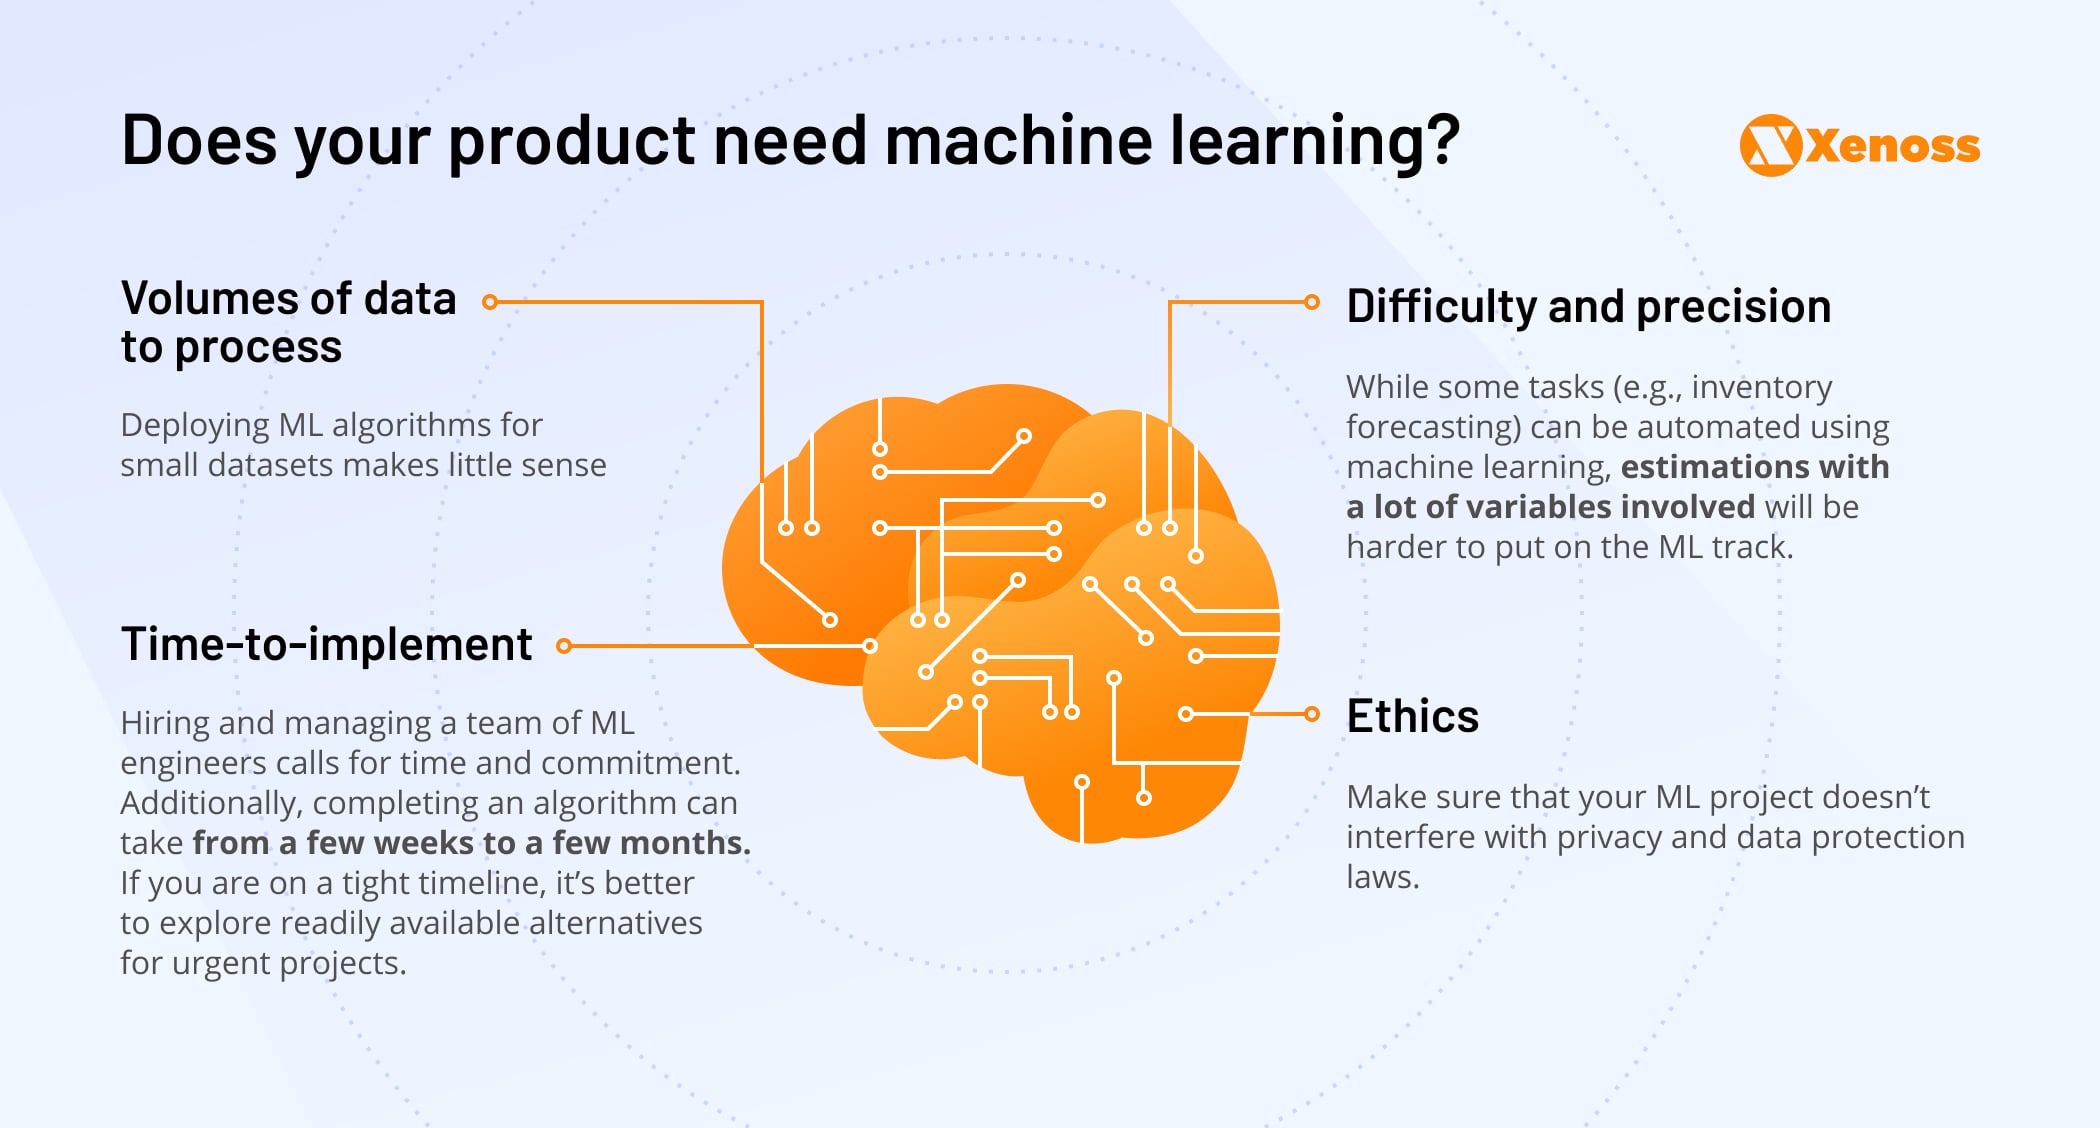 Does your product need machine learning?